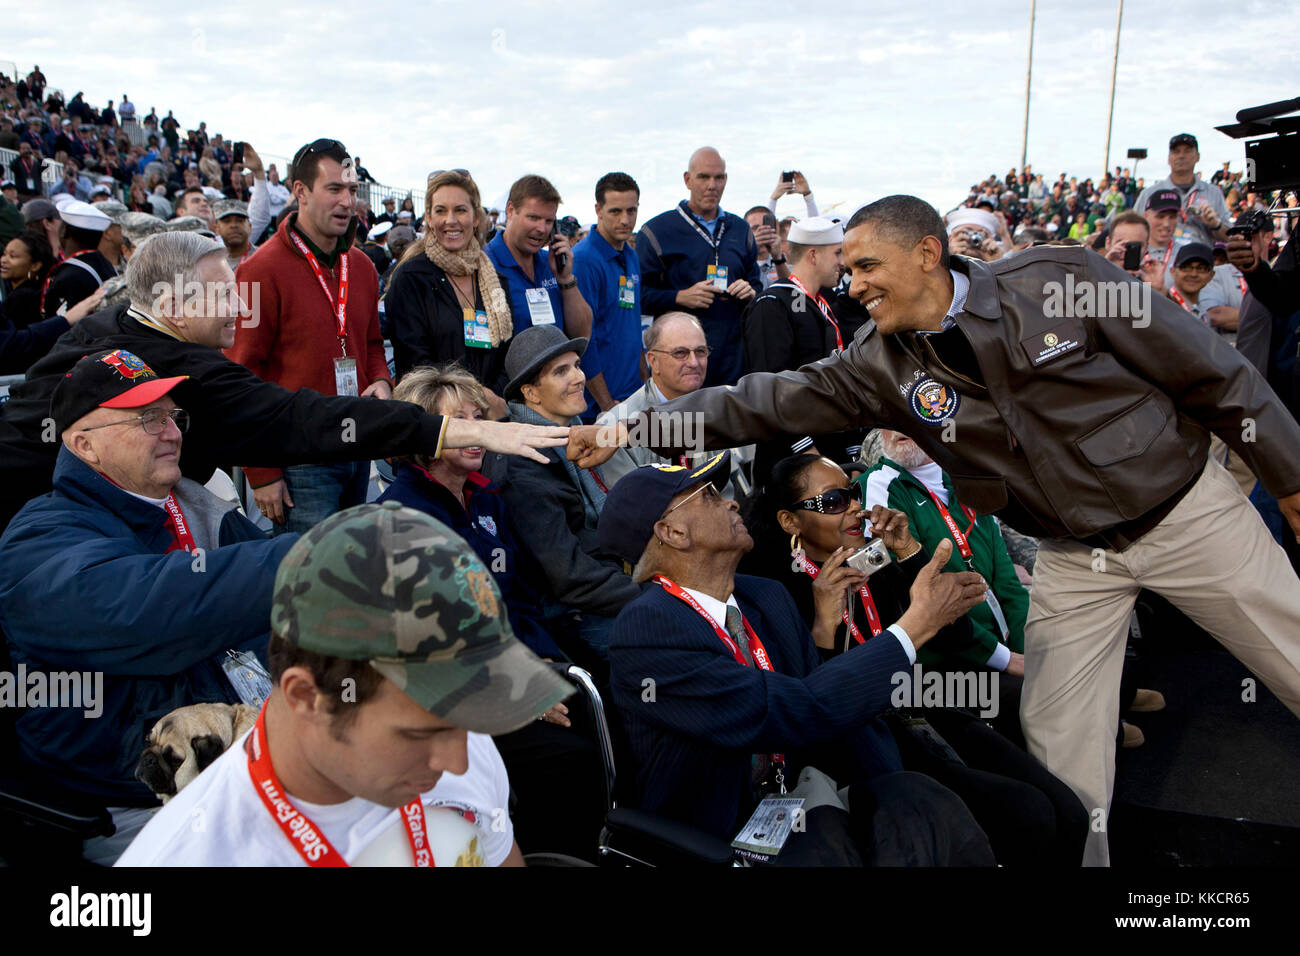 President Barack Obama greets veterans before the Carrier Classic basketball game between the University of North Carolina Tar Heels and Michigan State Spartans on the flight deck of the USS Carl Vinson, docked at North Island Naval Station in San Diego, Calif., Nov. 11, 2011. Stock Photo